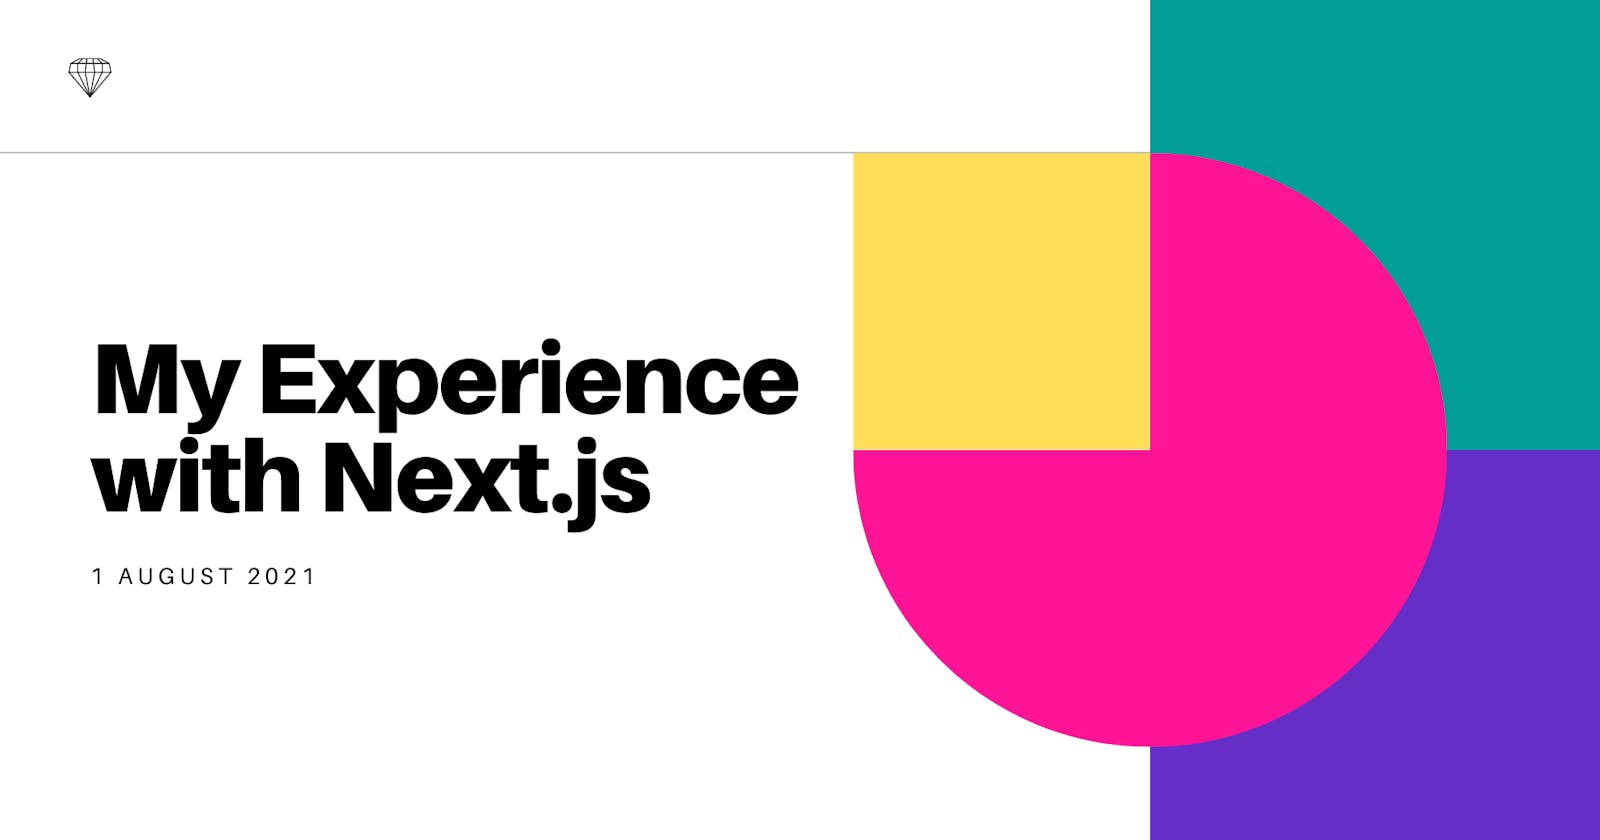 My Experience with Next.js